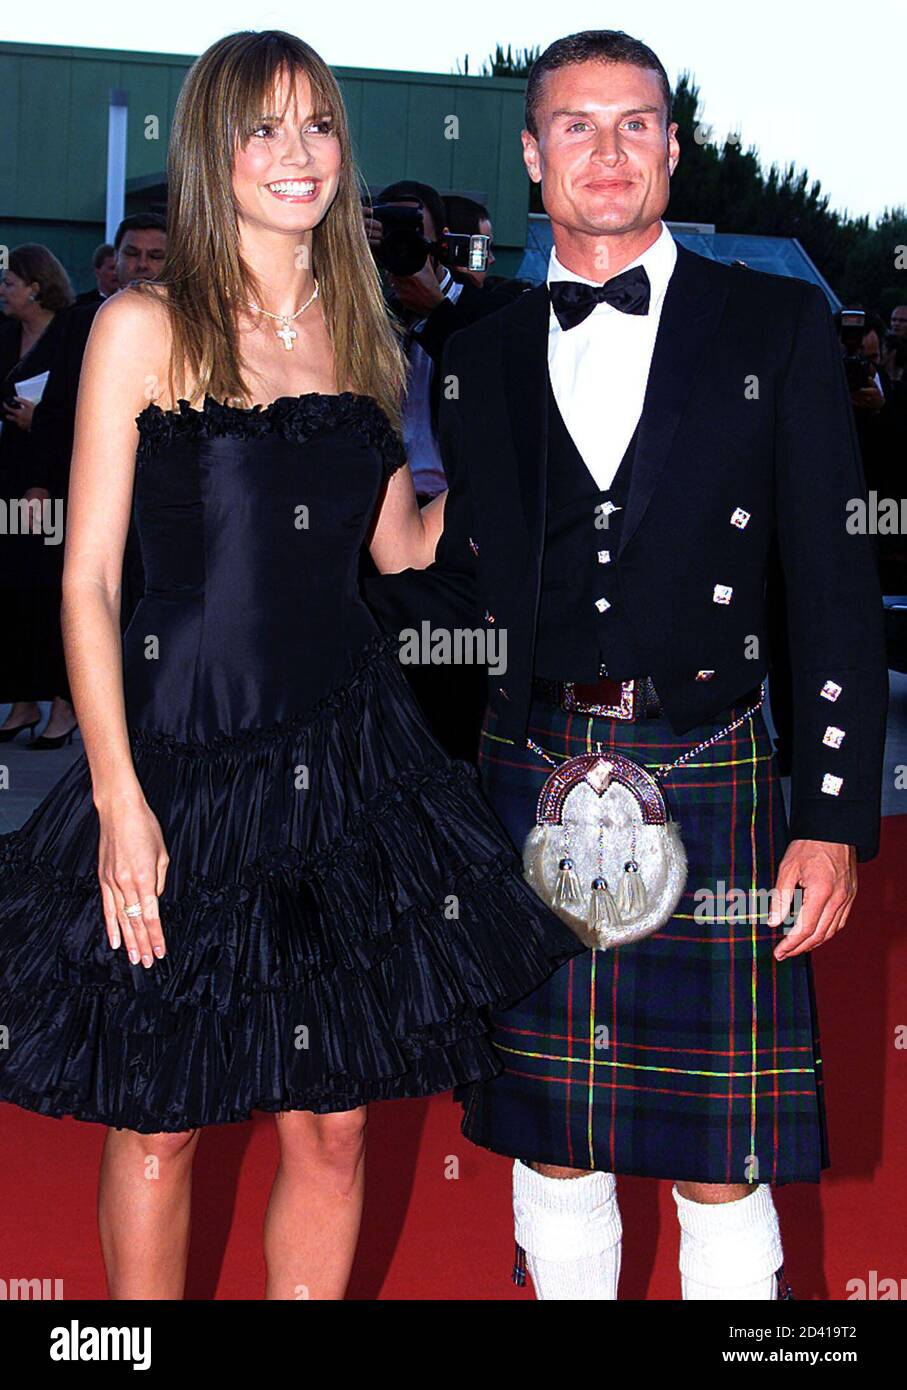 Scottish Formula One driver David Coulthard (R) and German top model Heidi Klum (L) arrive at the Laureus Sports Awards ceremony in Monaco, May 22, 2001. This annual ceremony celebrates sporting excelence across all disciplines and all continents. Stock Photo